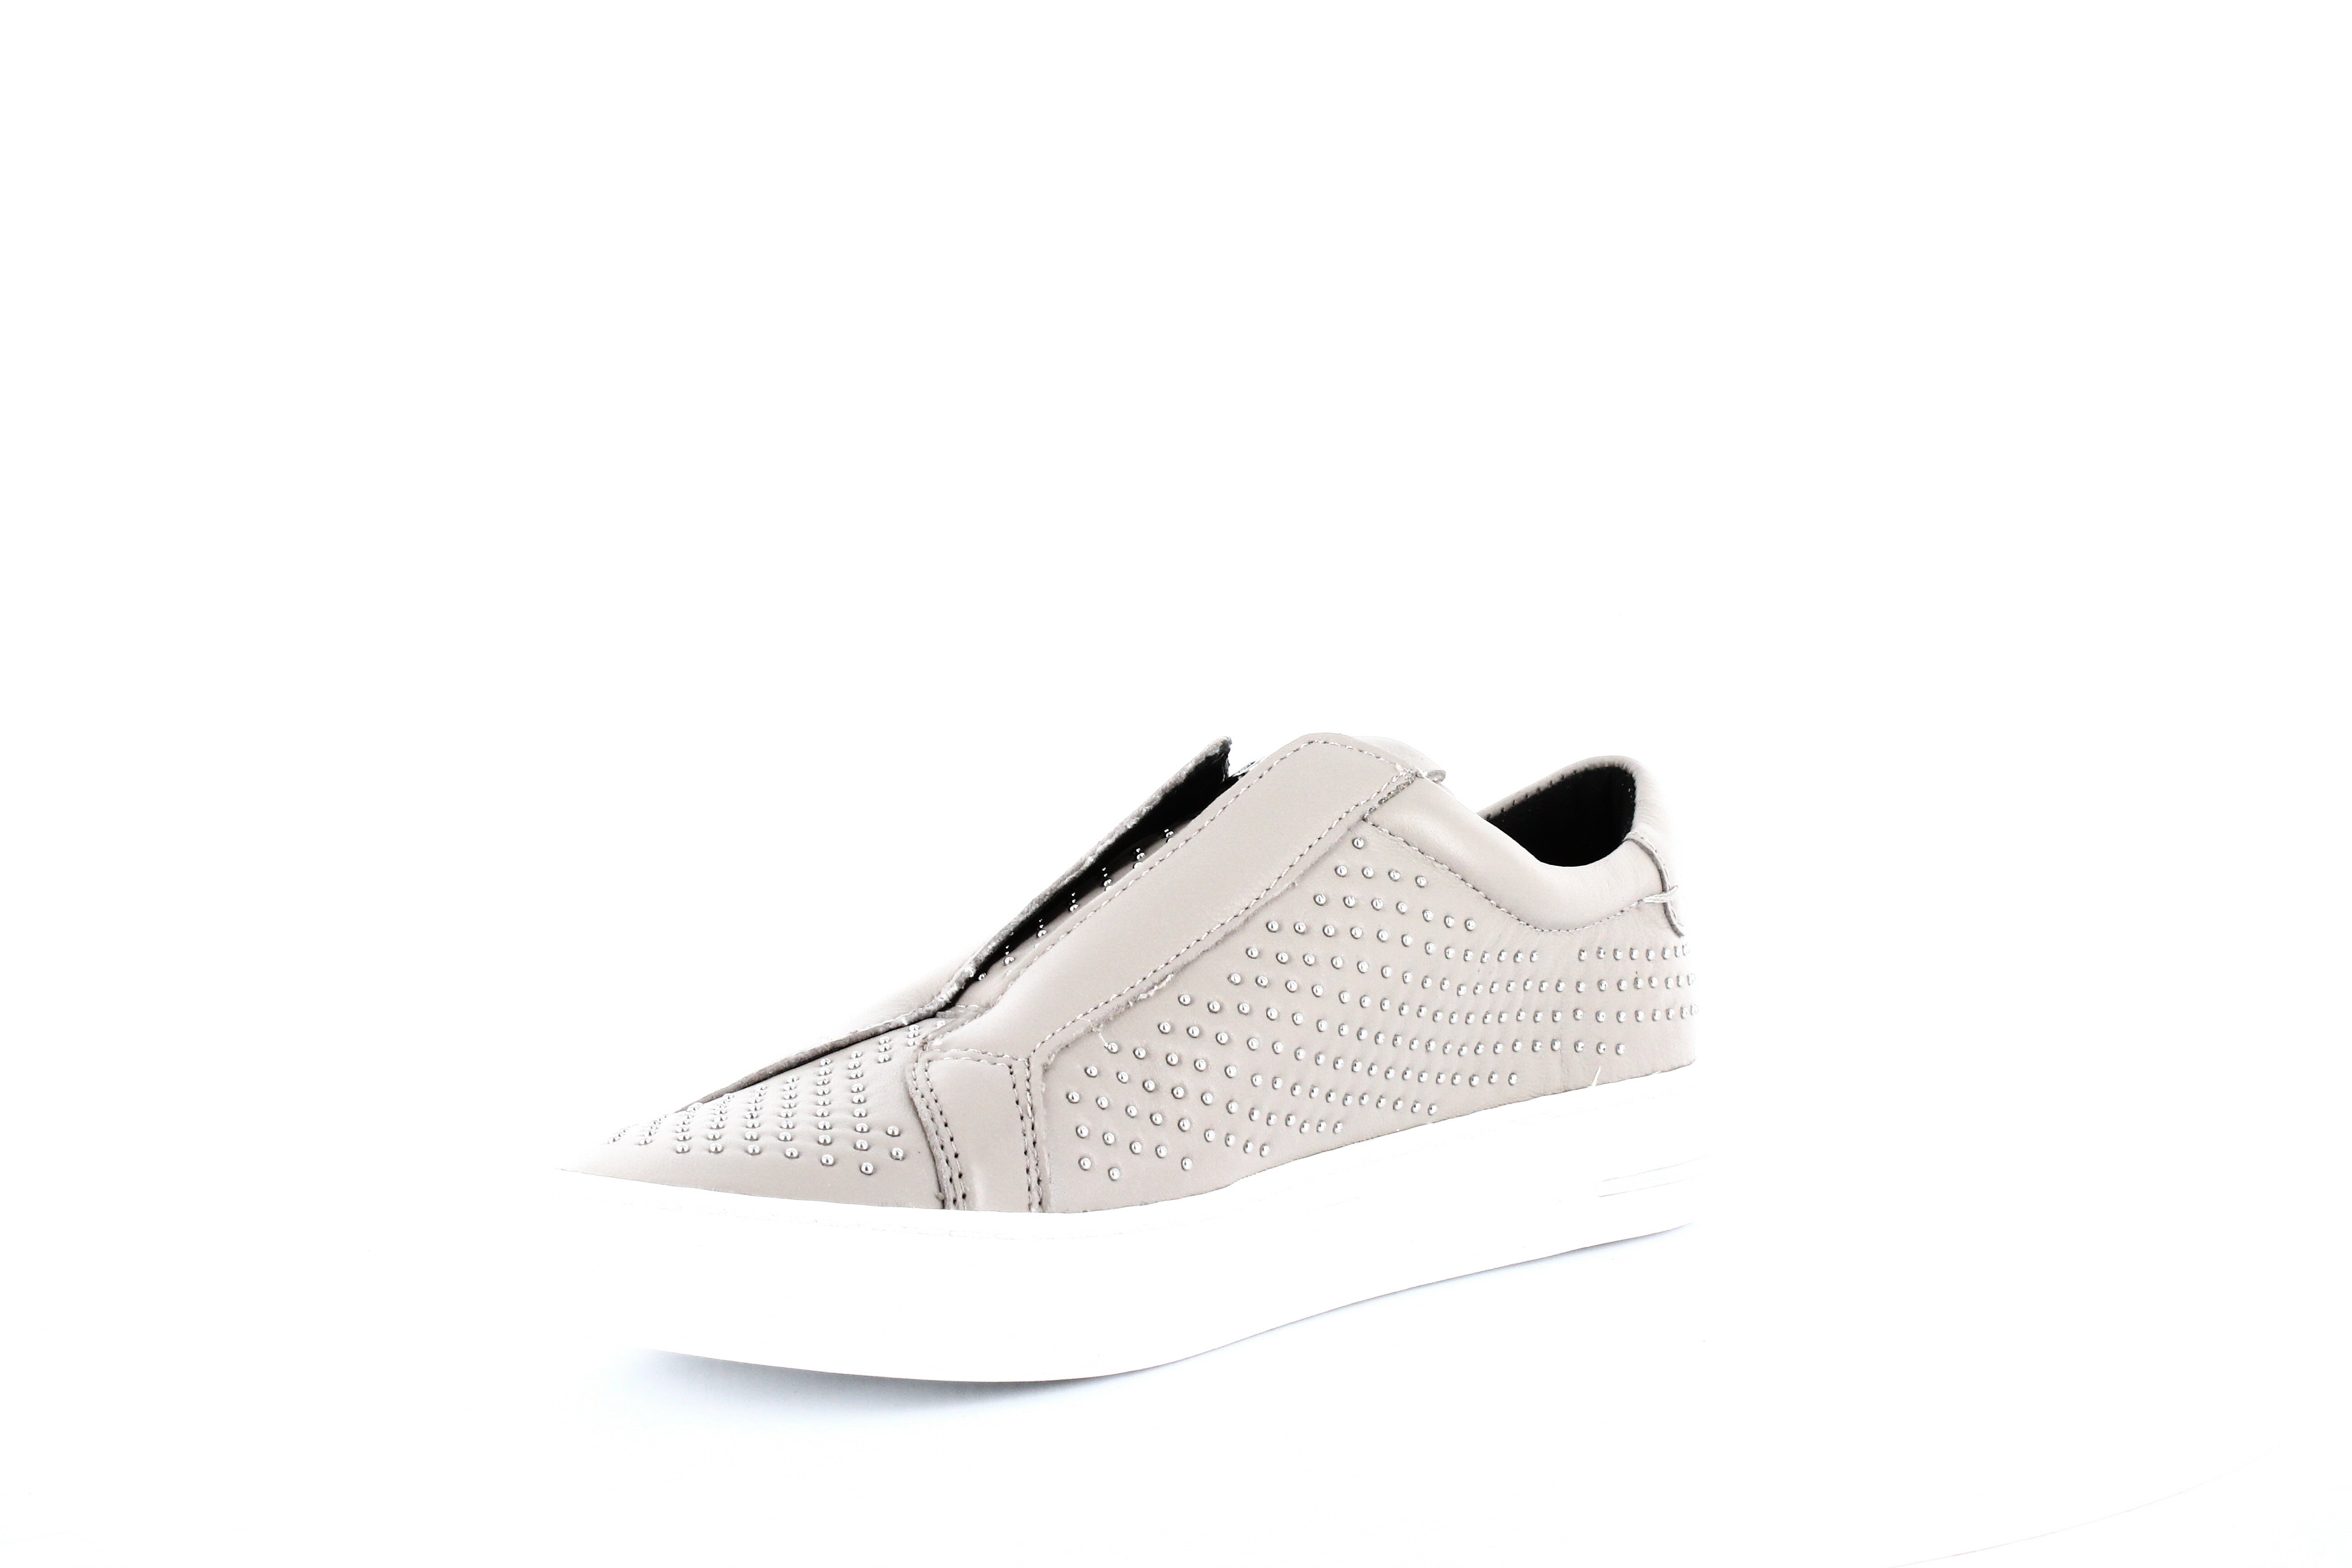 DKNY Conner Slip-On Sneakers | | Size 6.5 - Walmart.com